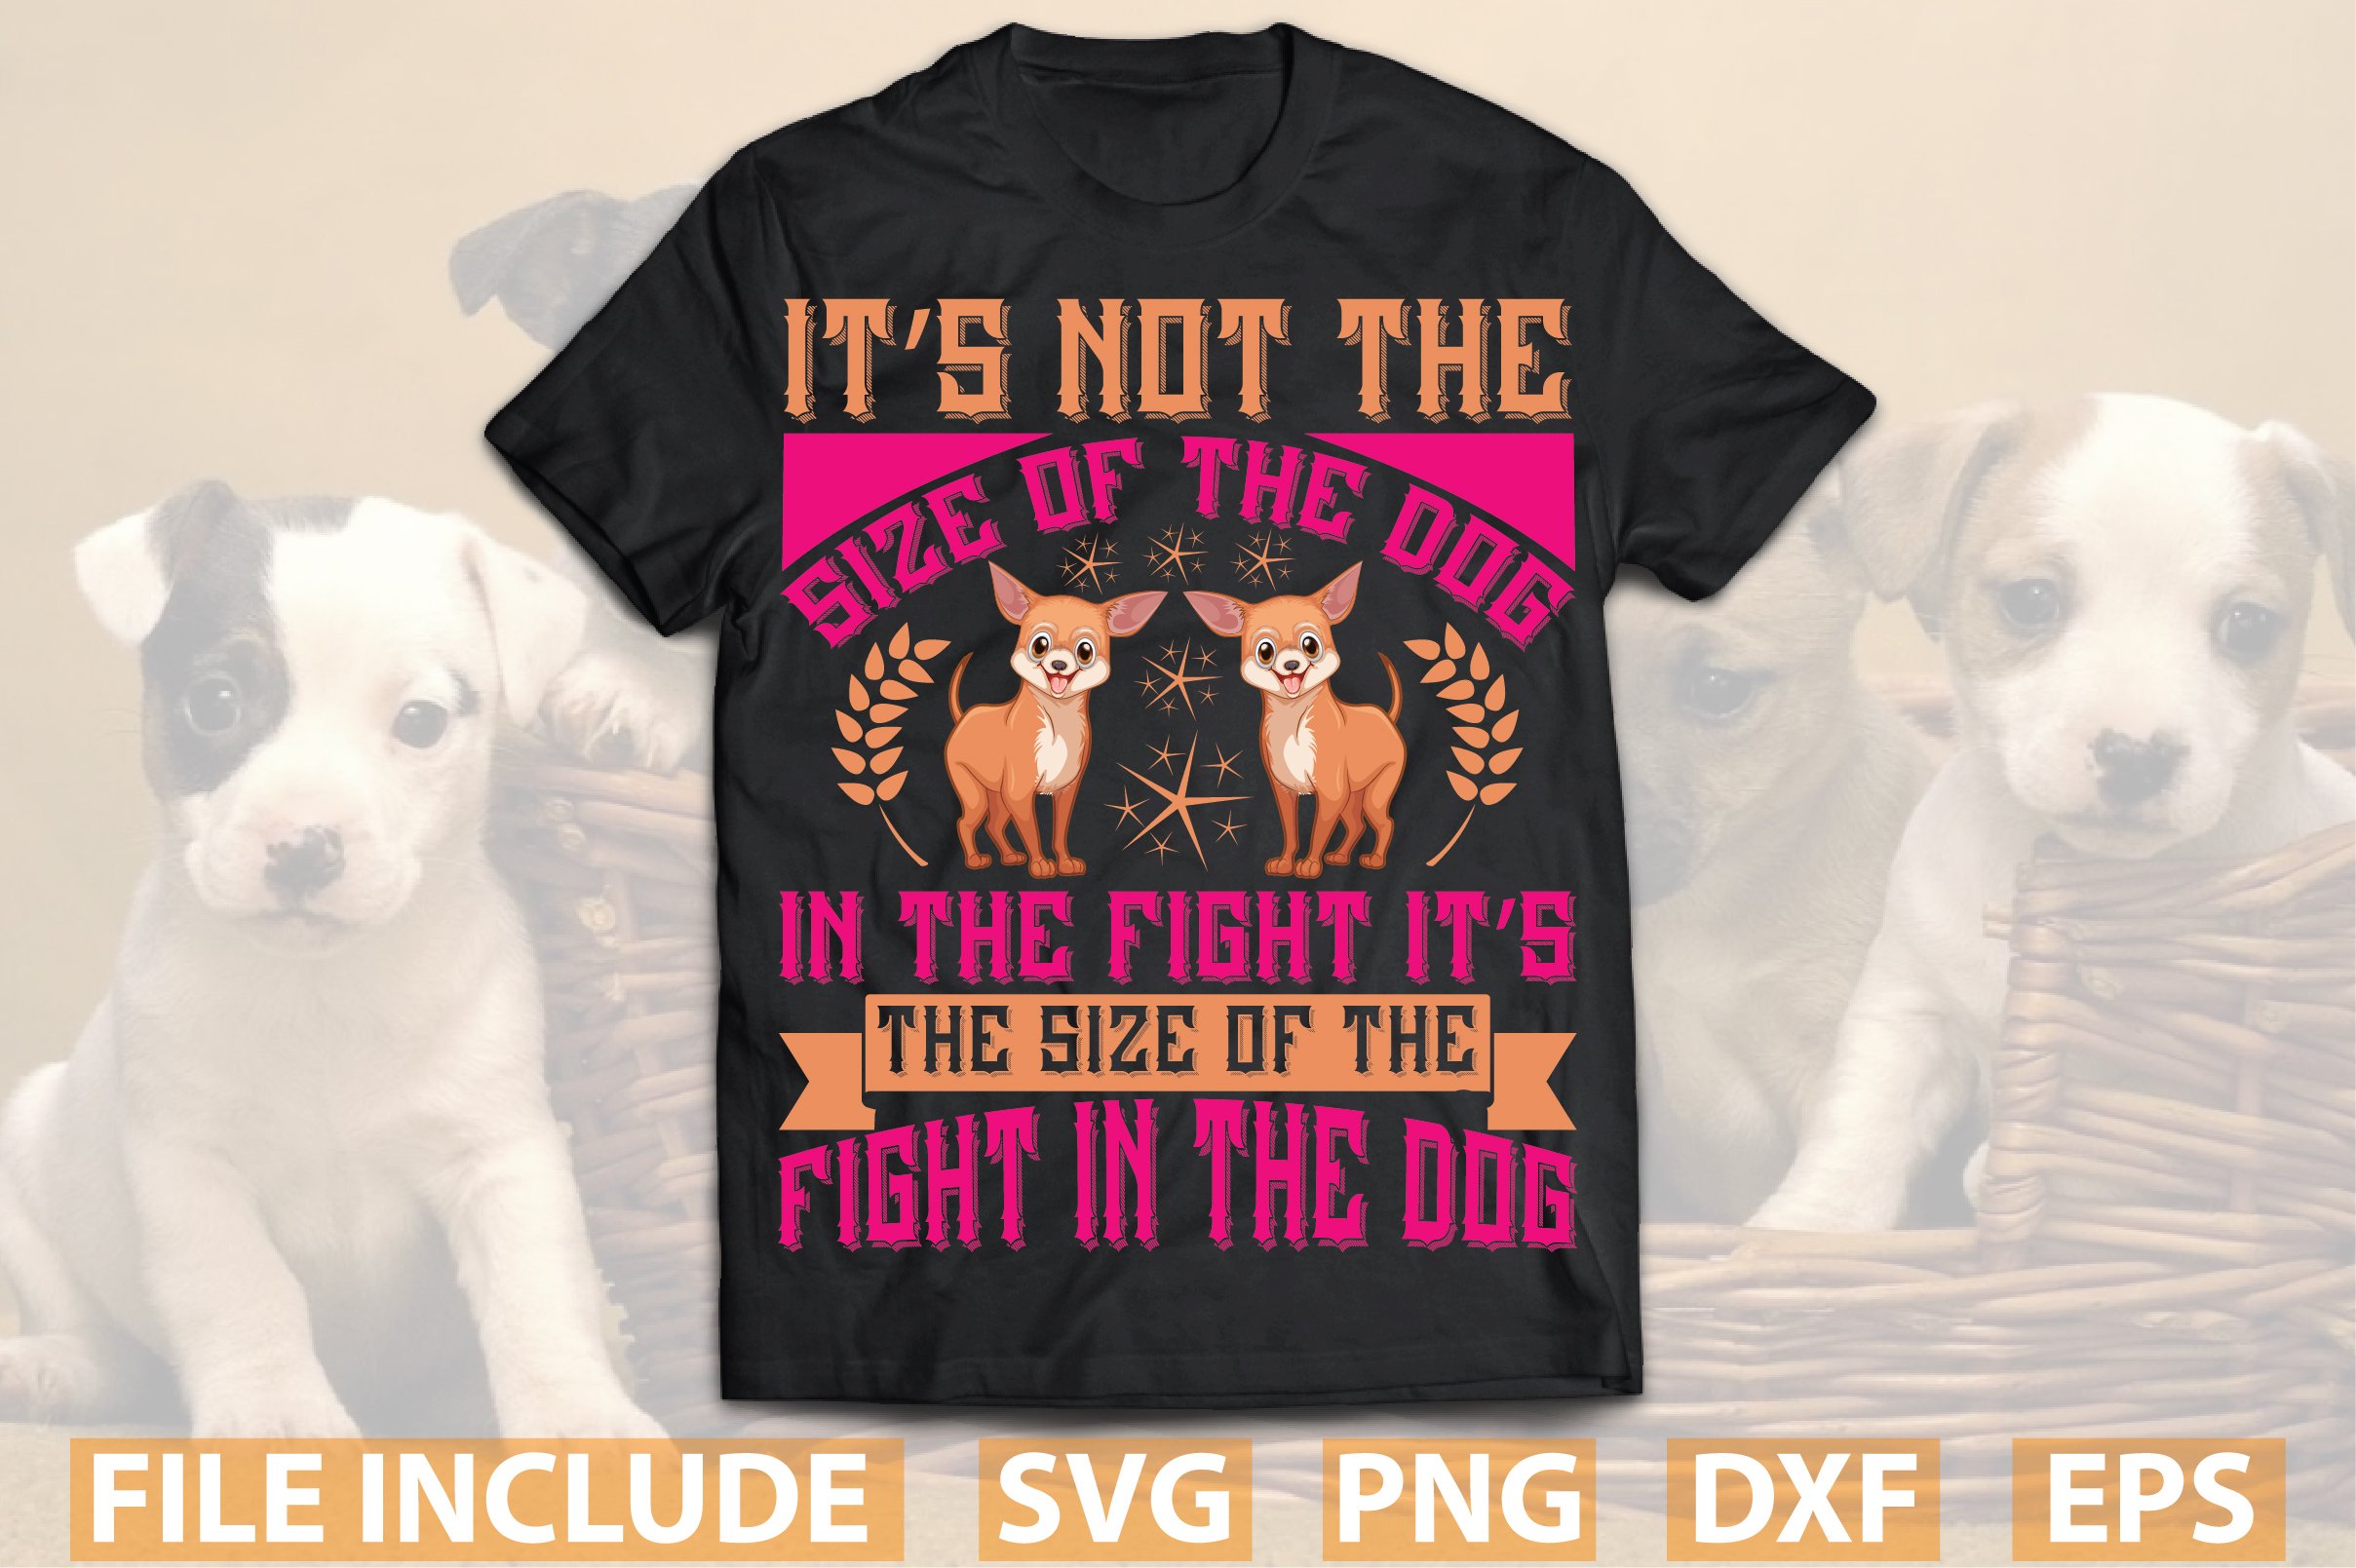 Black t-shirt with red font and two dogs.